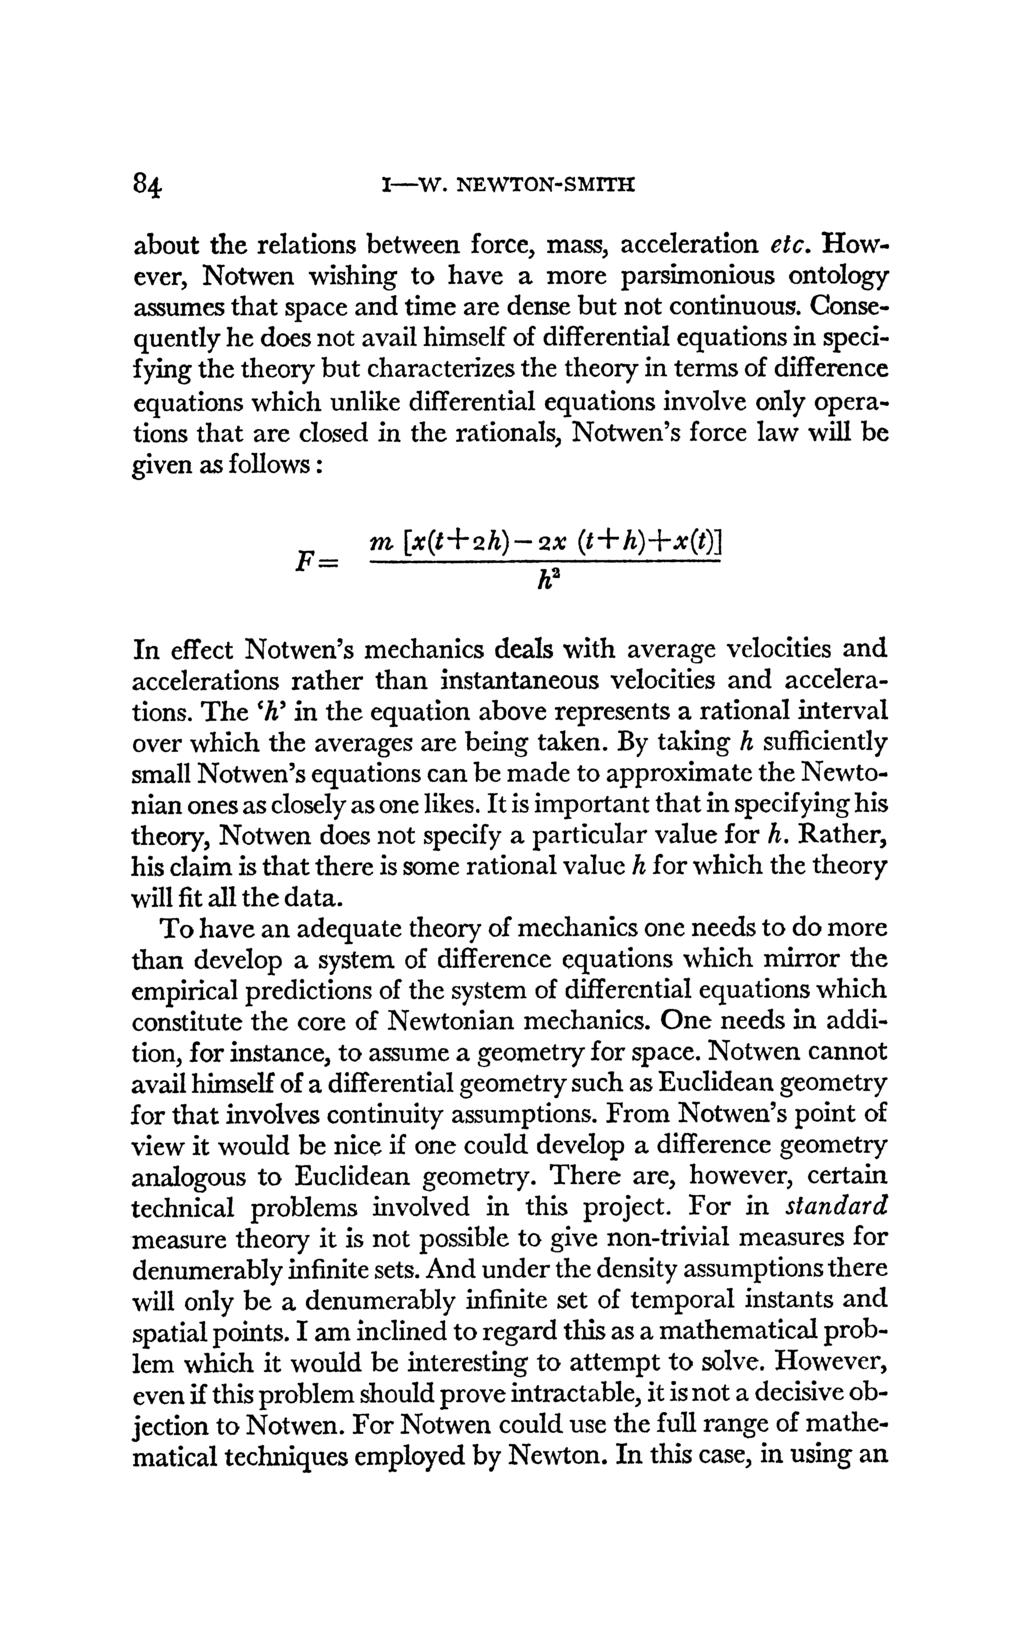 84 I-W. NEWTON-SMITH about the relations between force, mass, acceleration etc. However, Notwen wishing to have a more parsimonious ontology assumes that space and time are dense but not continuous.